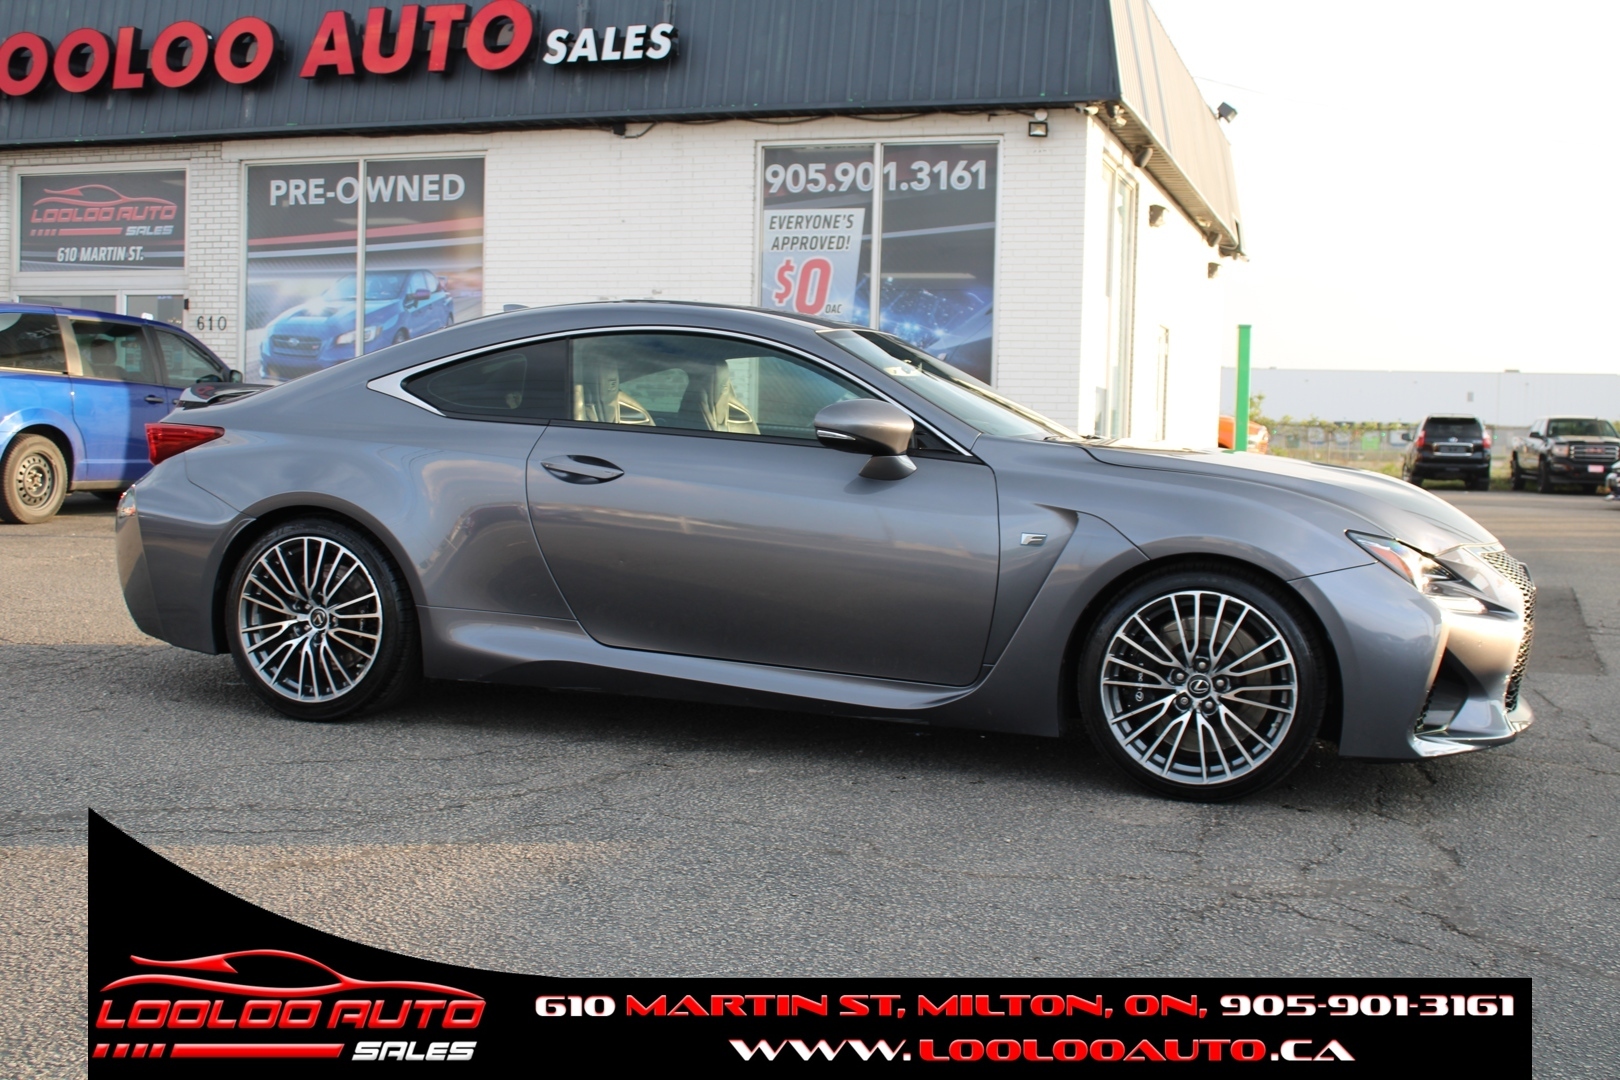 2015 Lexus RC F 5.0L V8 | Safety Certified | Financing Available |